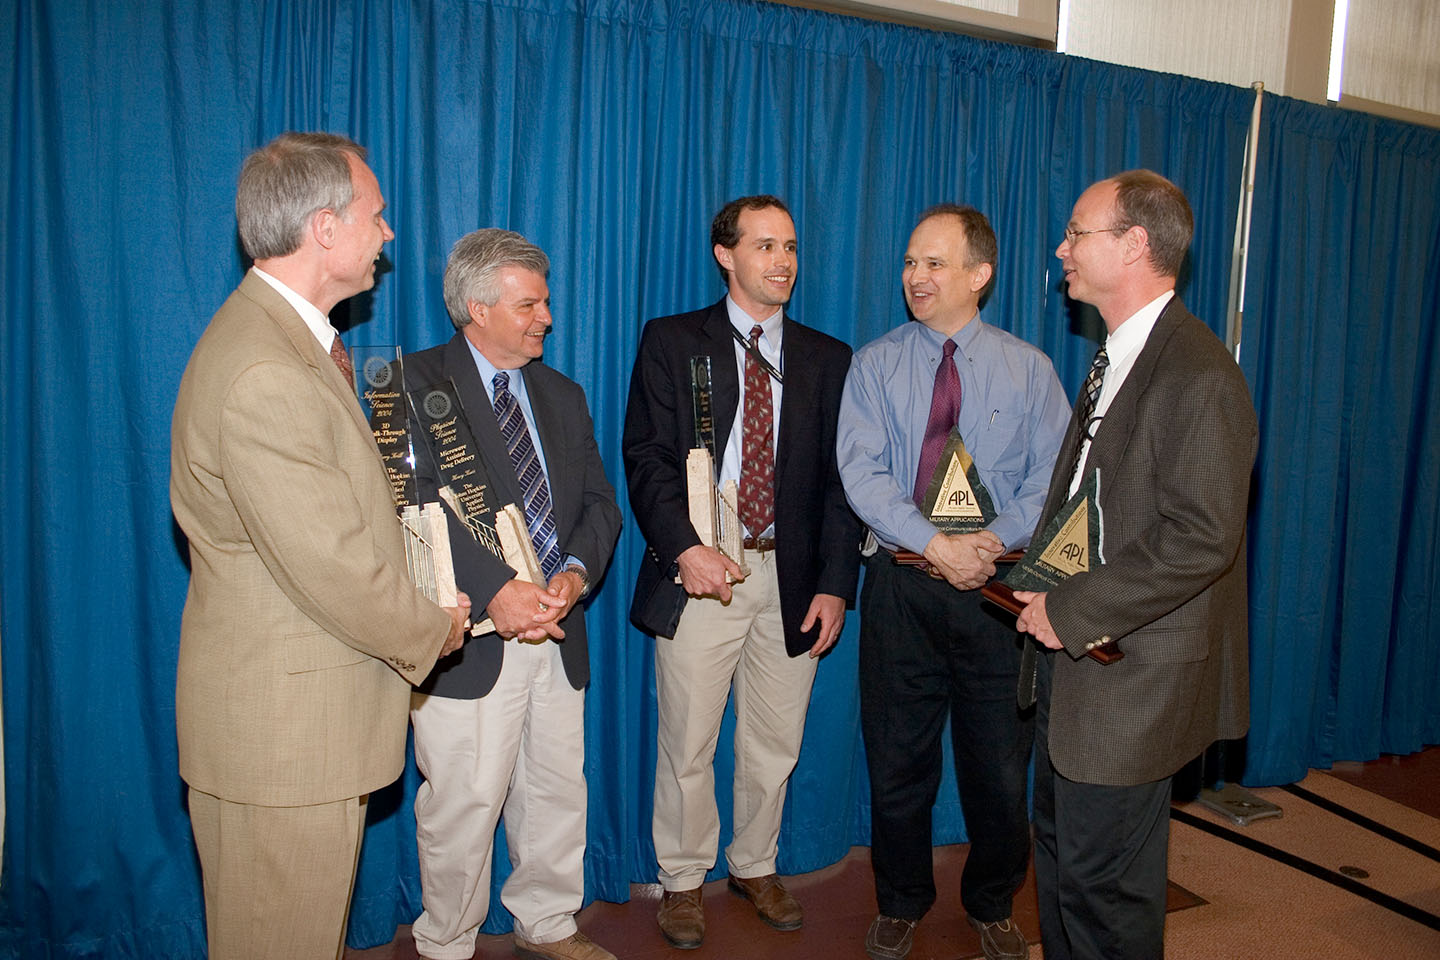 Applied Physics Laboratory researchers (from left) Jerry Krill, Henry Kues, Eric Van Gieson, Bradley Boone and Matthew Bevan